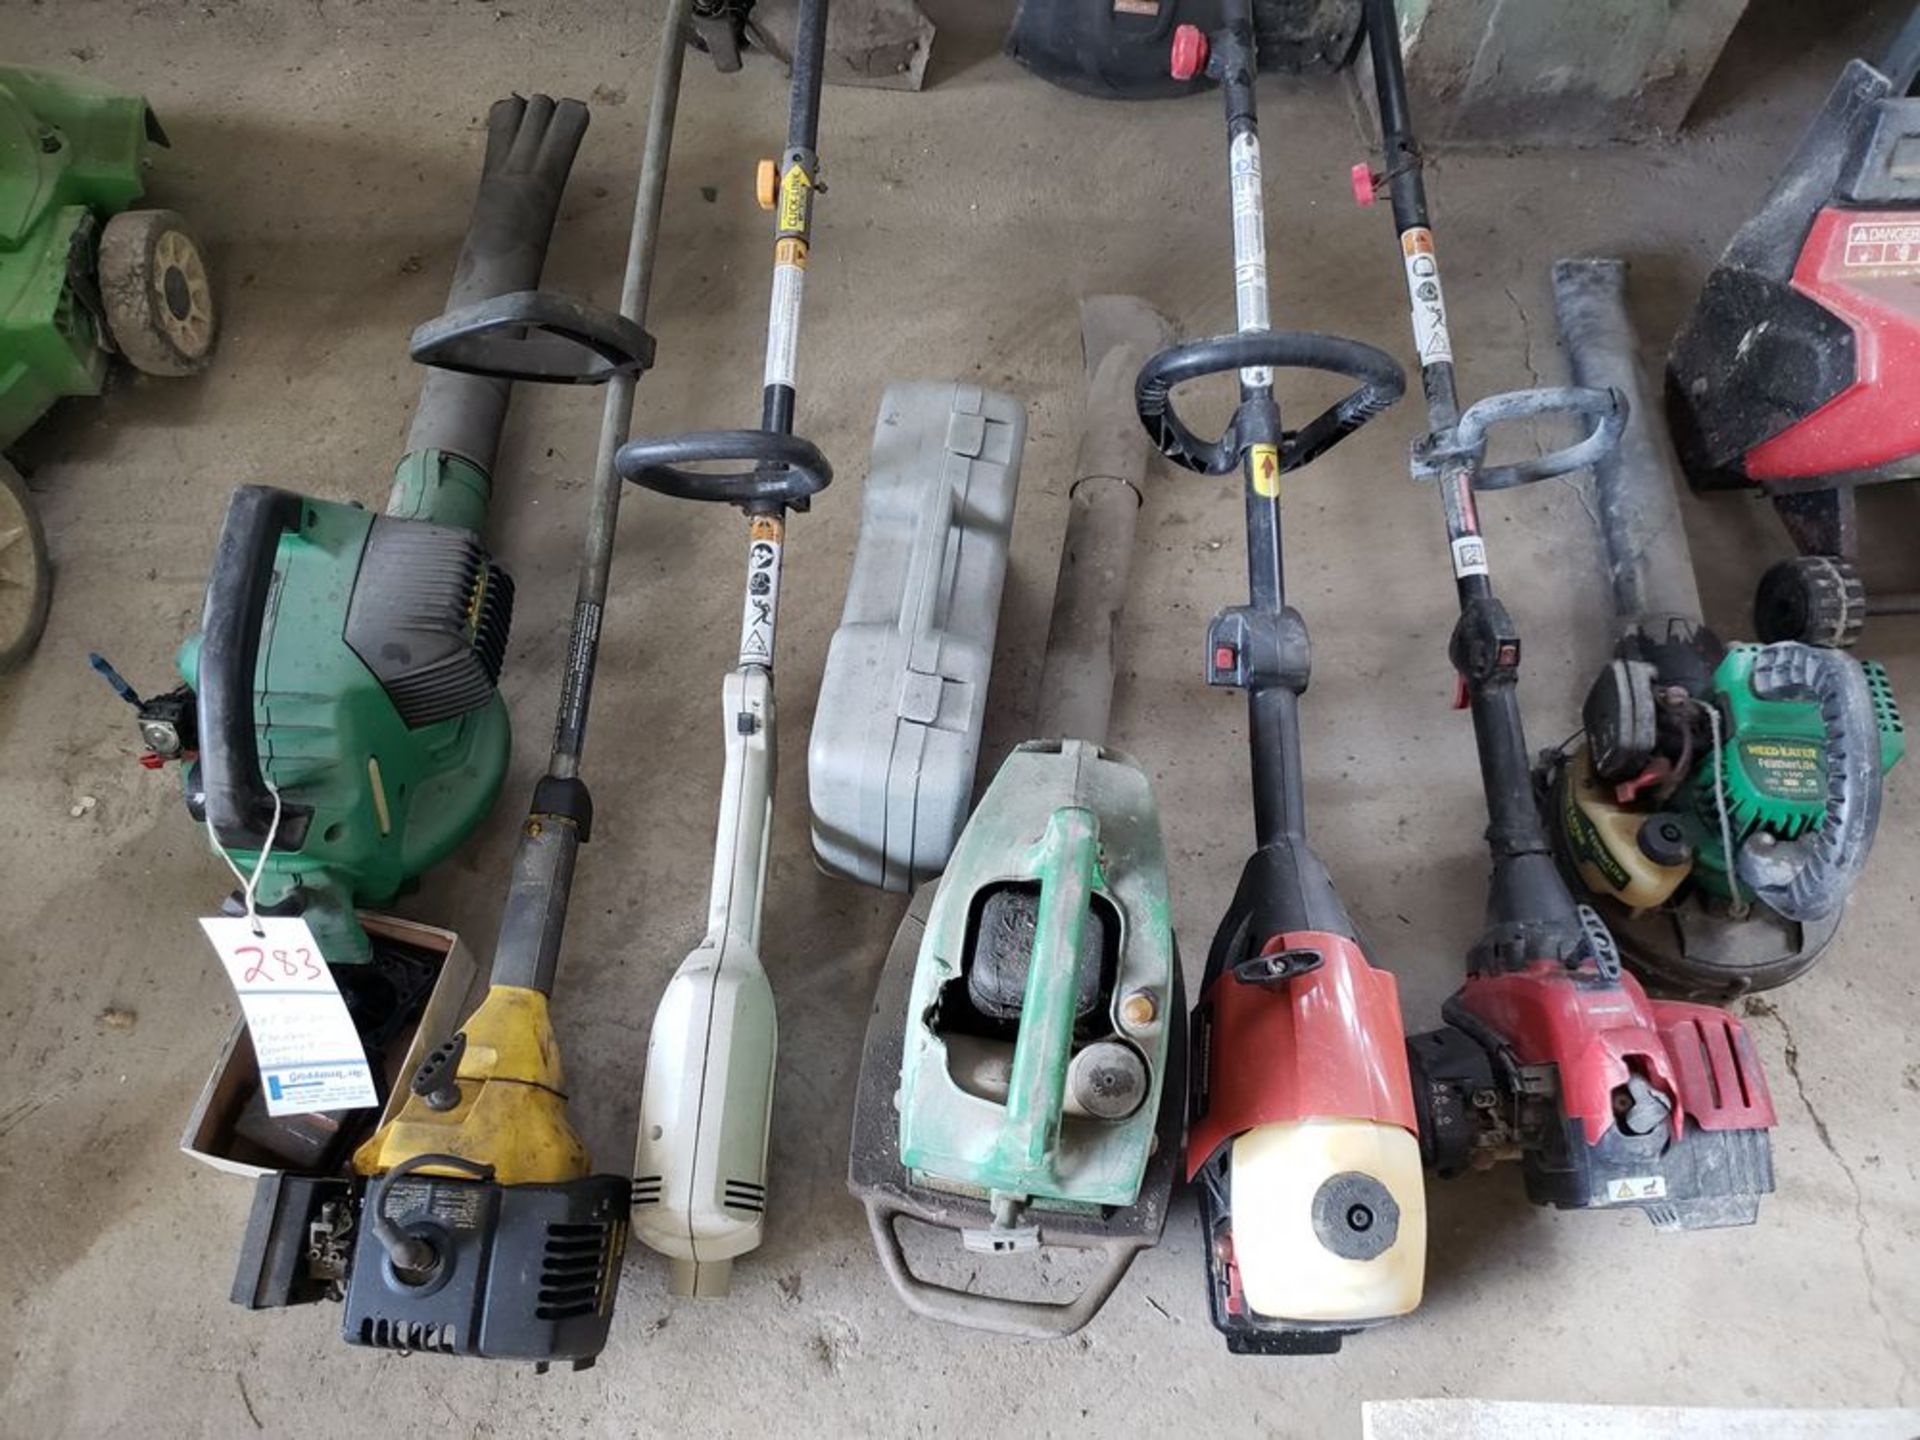 LOT OF LAWN EQUIPMENT BLOWERS, TRIMMERS - 7 ITEMS